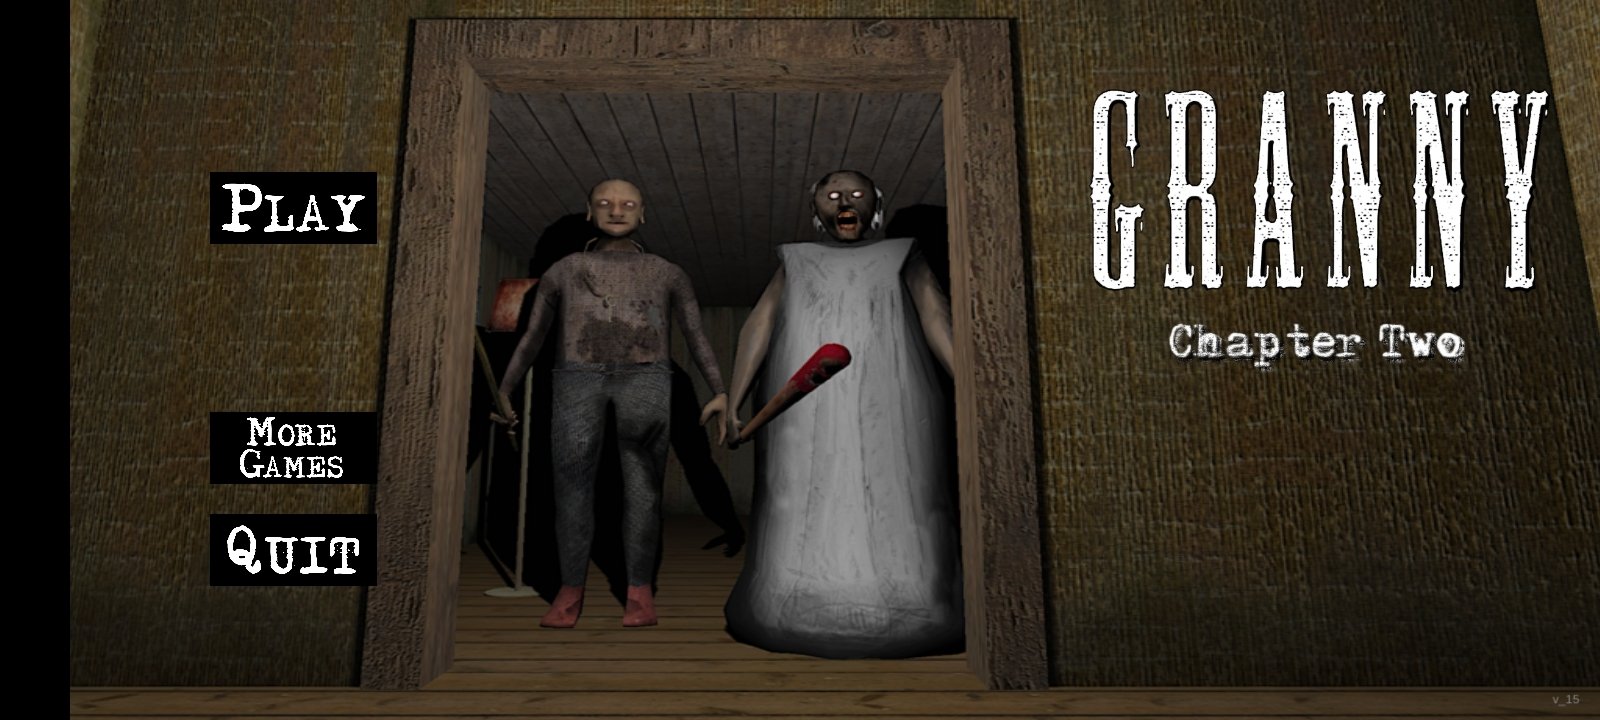 GRANNY: CHAPTER TWO free online game on